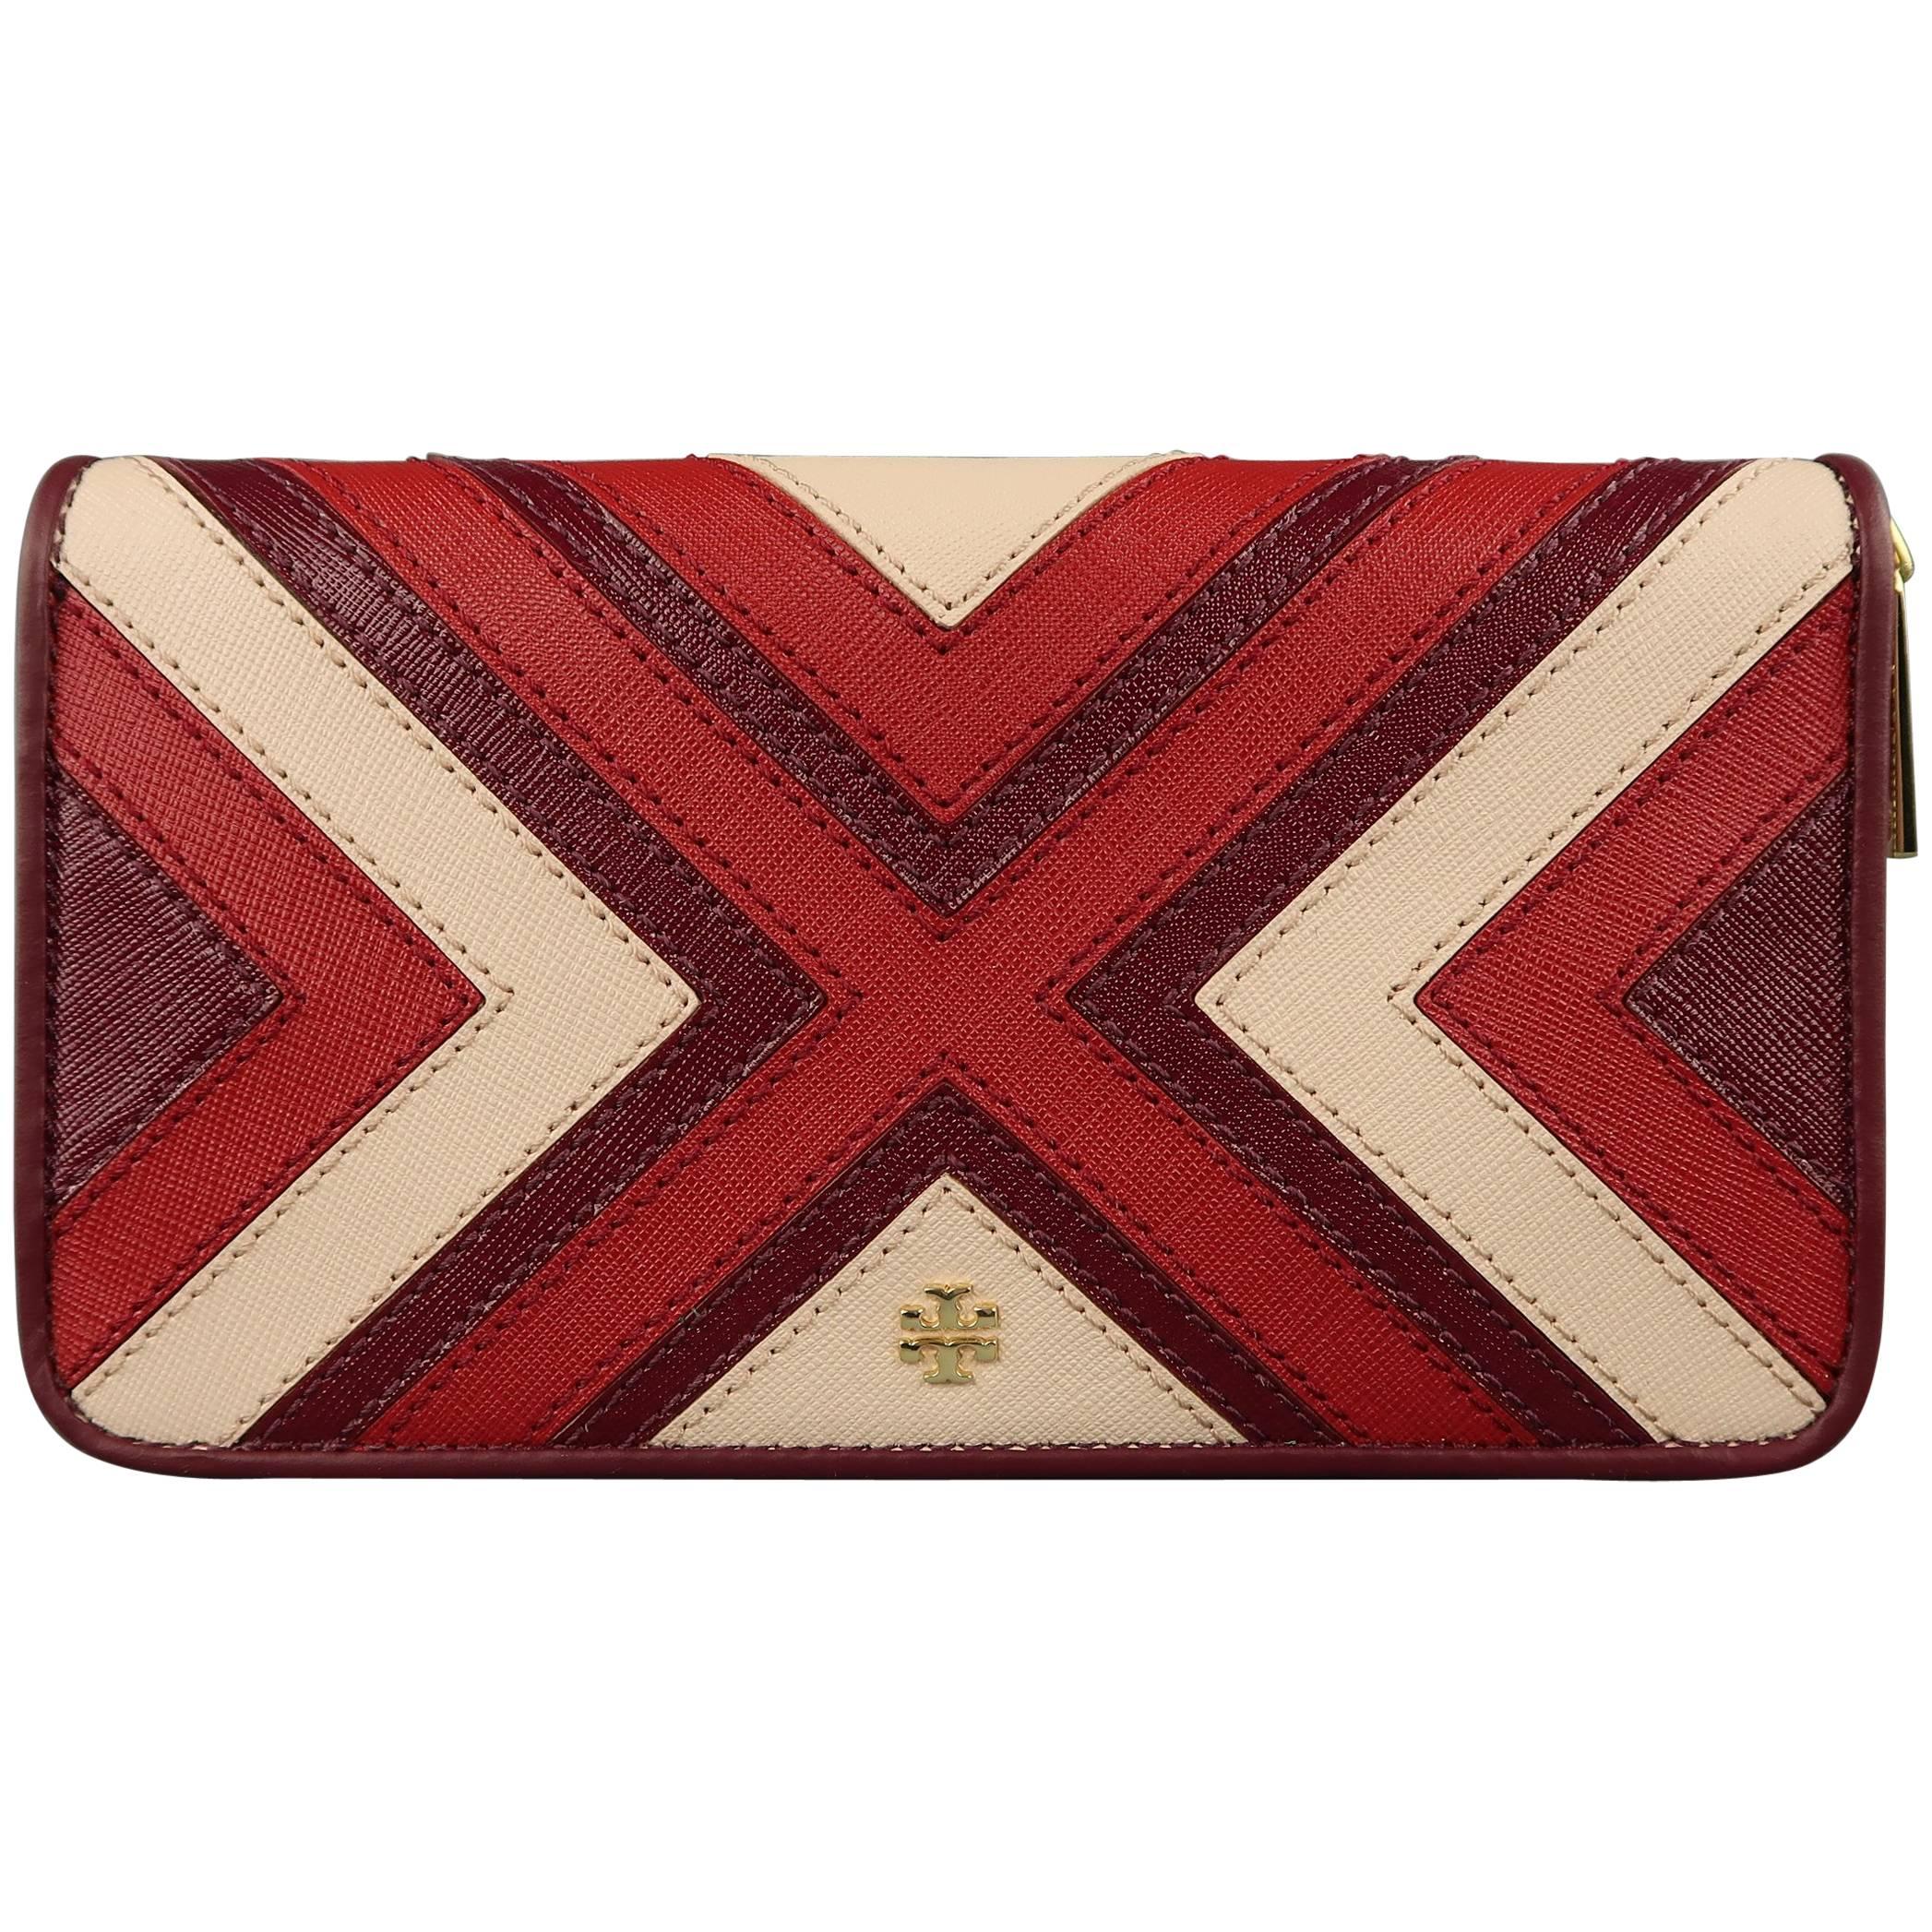 TORY BURCH Plum Red & Pink Patchwork Leather Zip Wallet